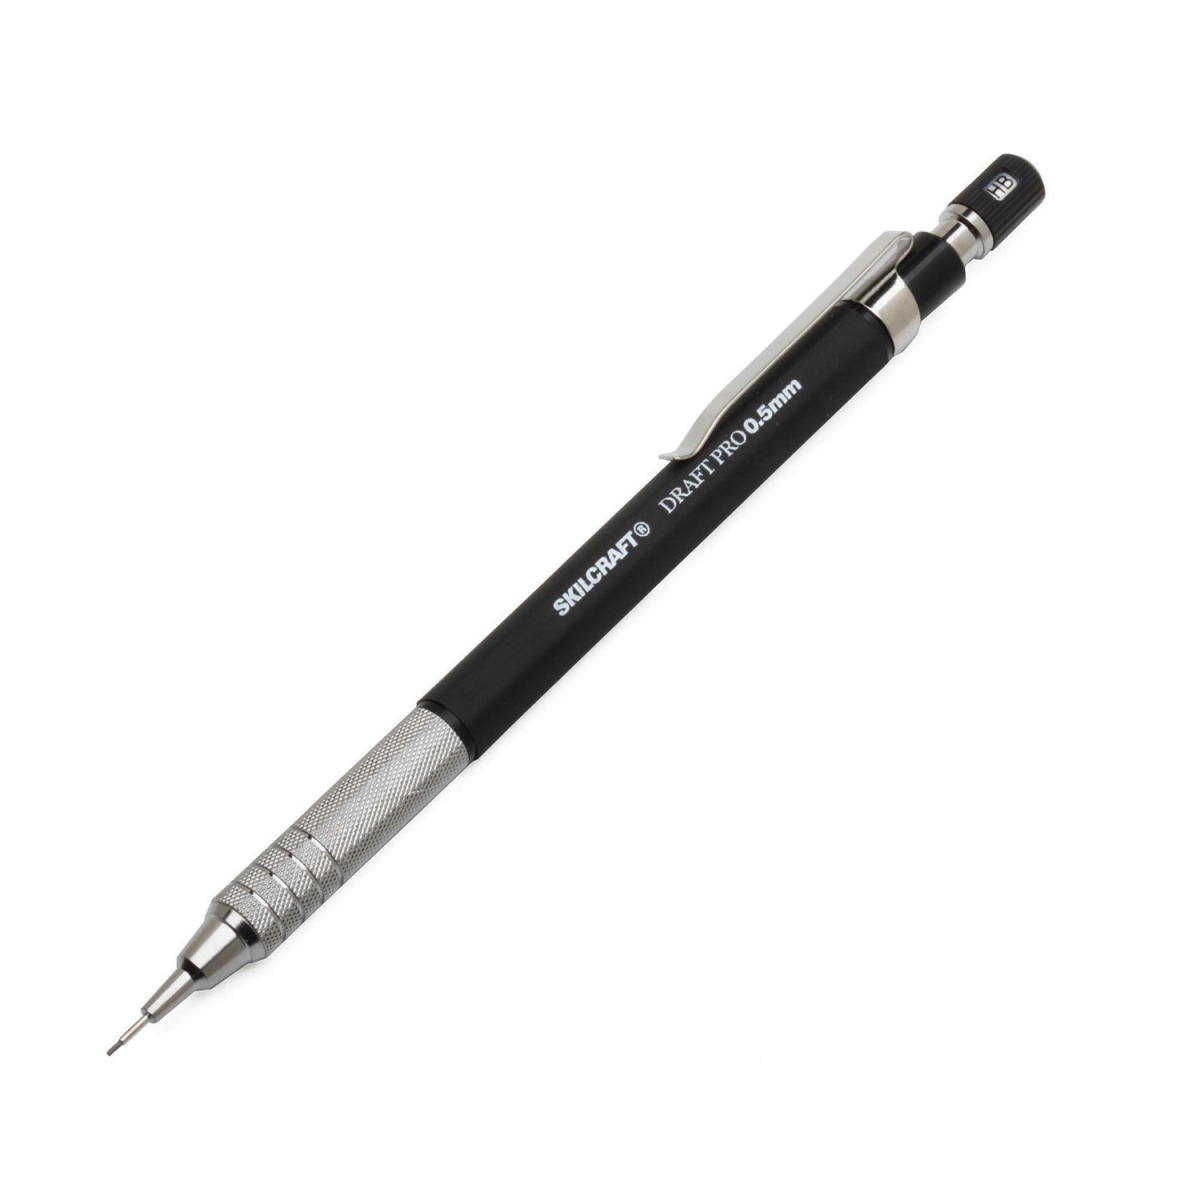 Picture of Abilityone 7520016943026 0.5 mm Skilcraft Draft Pro Mechanical Drafting Pencil